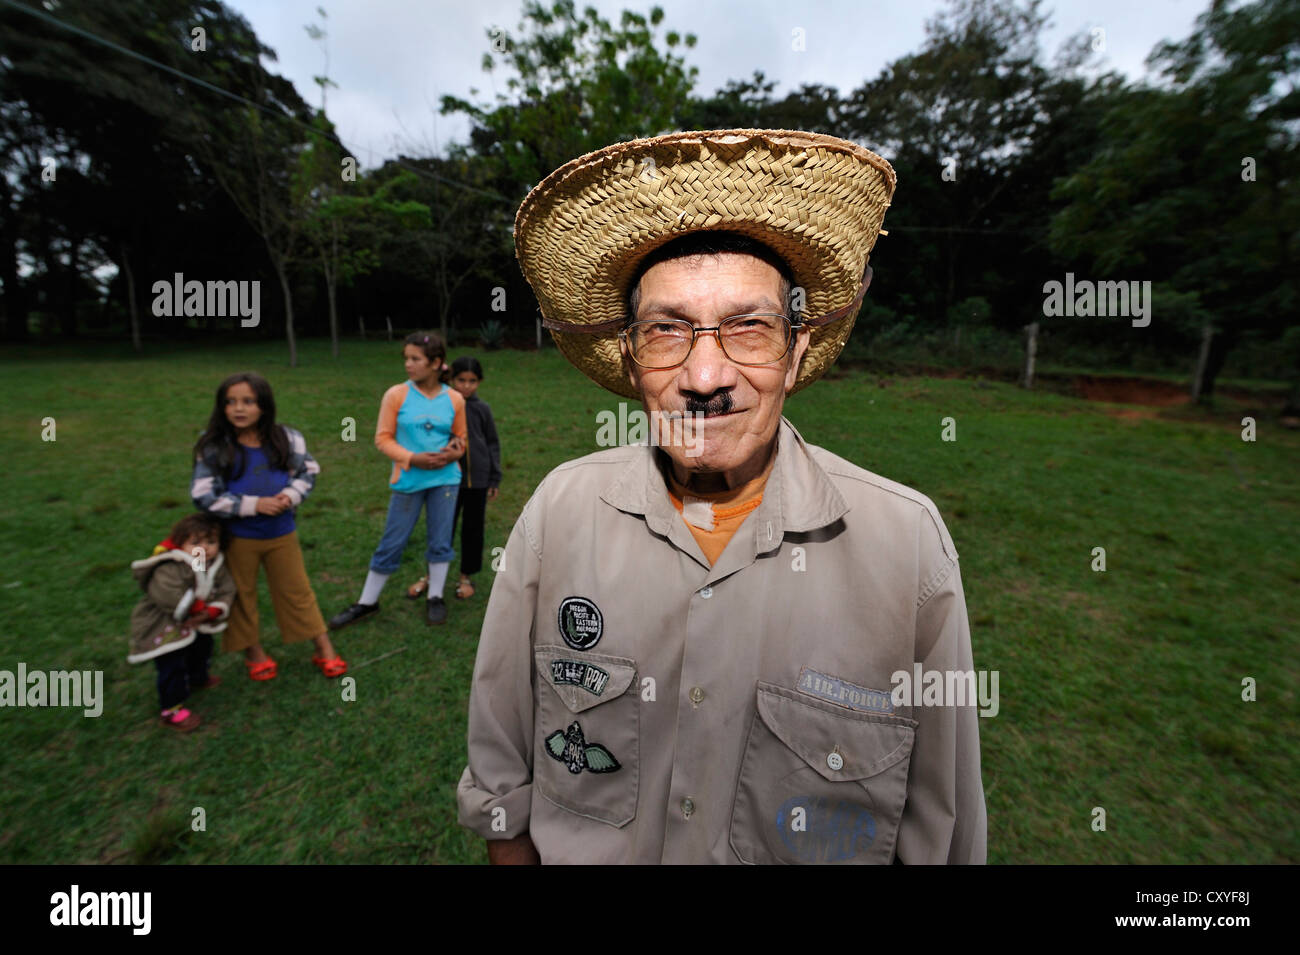 Old man with a straw hat and a moustache, Comunidad Kinta'i, Caaguazu, Paraguay, South America Stock Photo